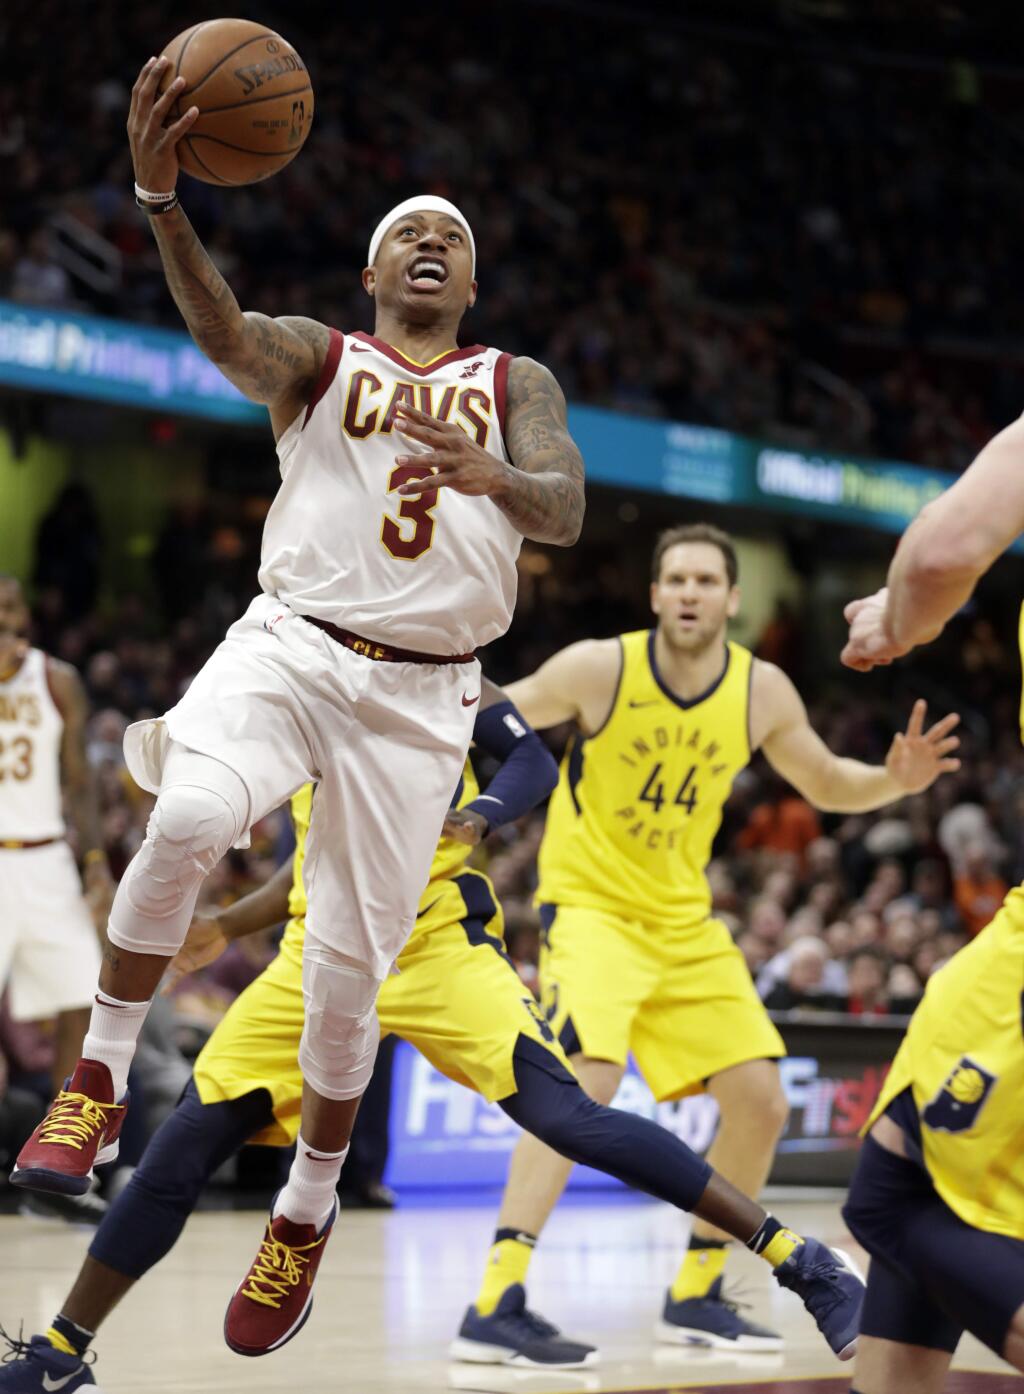 The Cleveland Cavaliers' Isaiah Thomas drives to the basket against the Indiana Pacers in the first half Friday, Jan. 26, 2018, in Cleveland. (AP Photo/Tony Dejak)